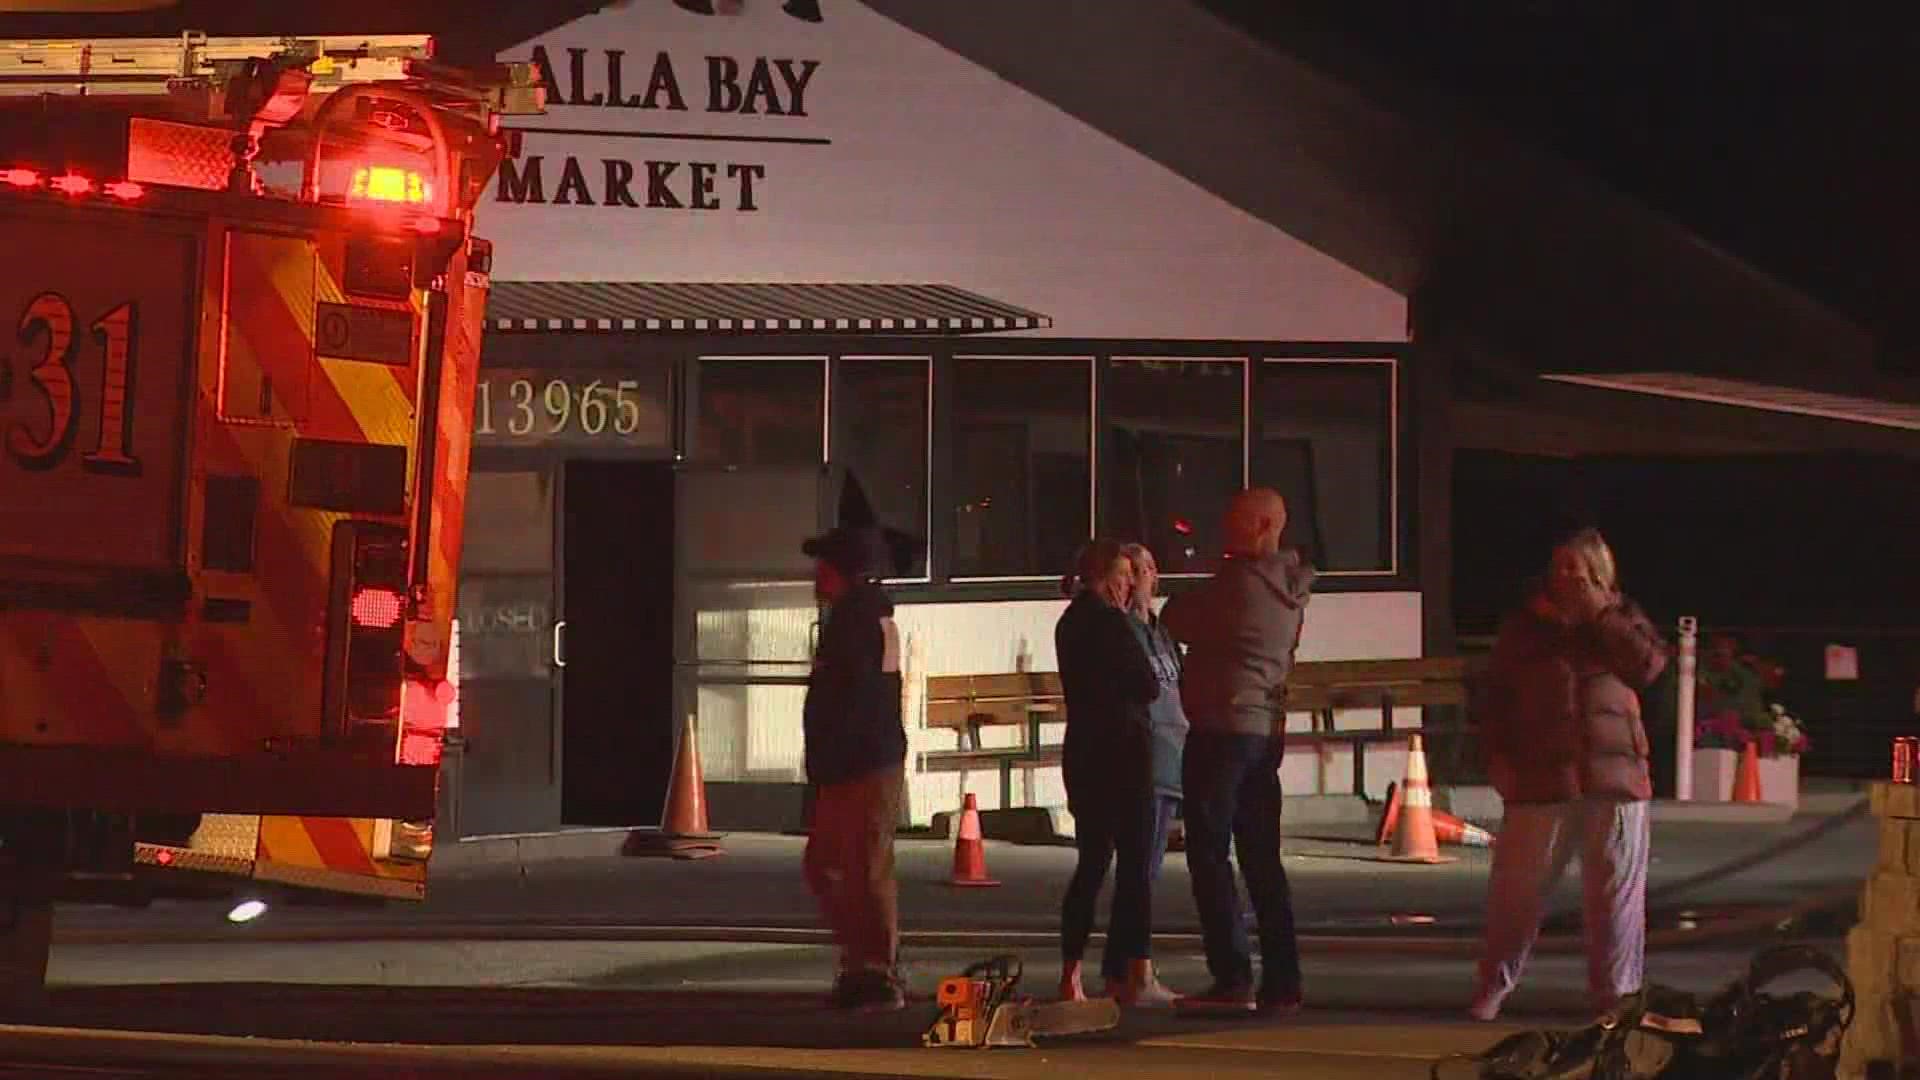 Crews responded to a 2-alarm fire at Olalla Bay Market around 2:15 a.m. Store owner Gregg Olsen told KING 5 the damage looked “pretty bad.”